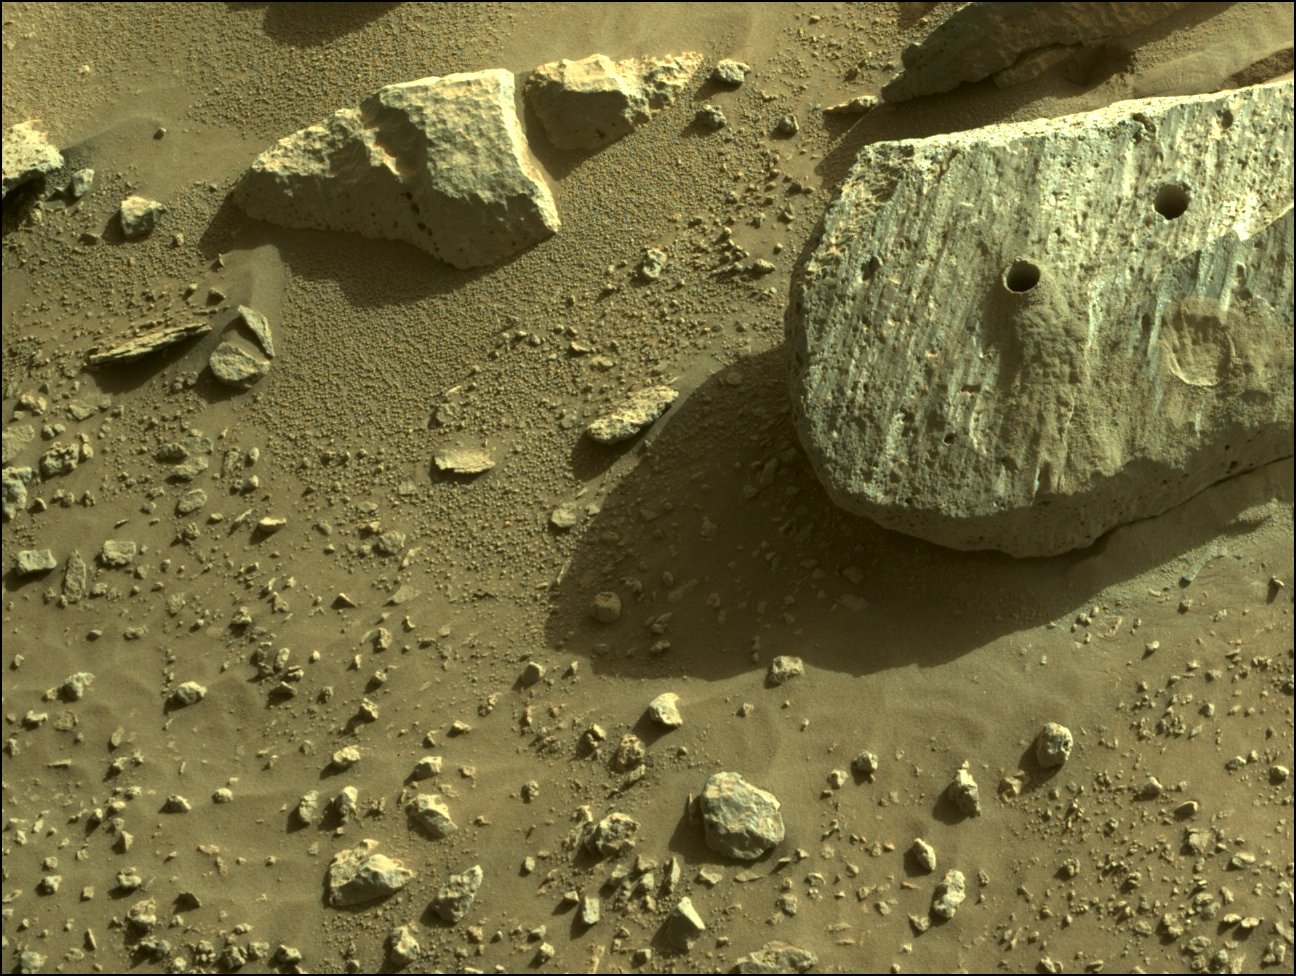 The Rochette boulder where the rover took the first two cores. Credit: NASA